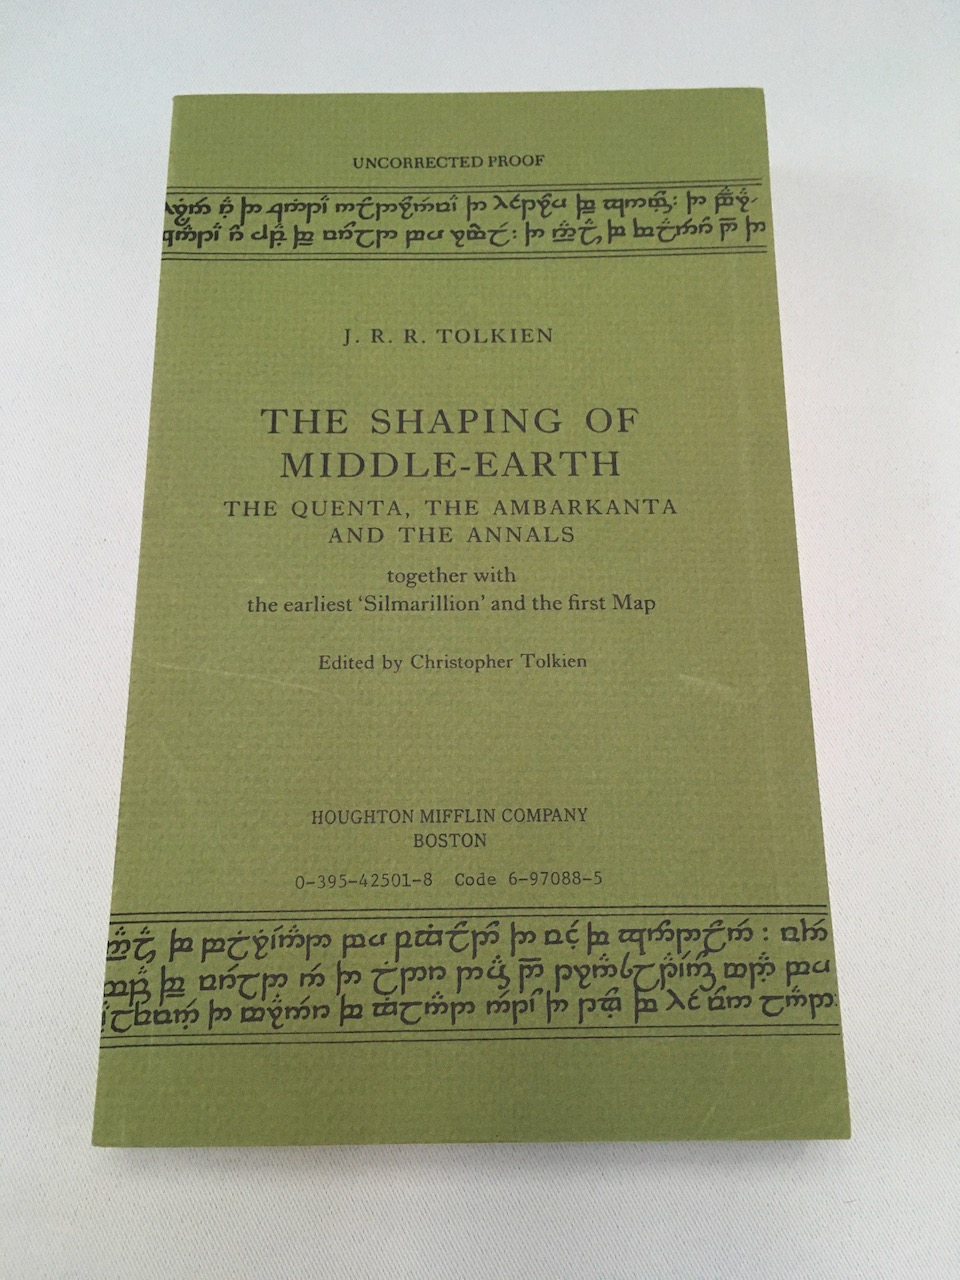 The Shaping of Middle-earth Uncorrected Proof US 1986 1